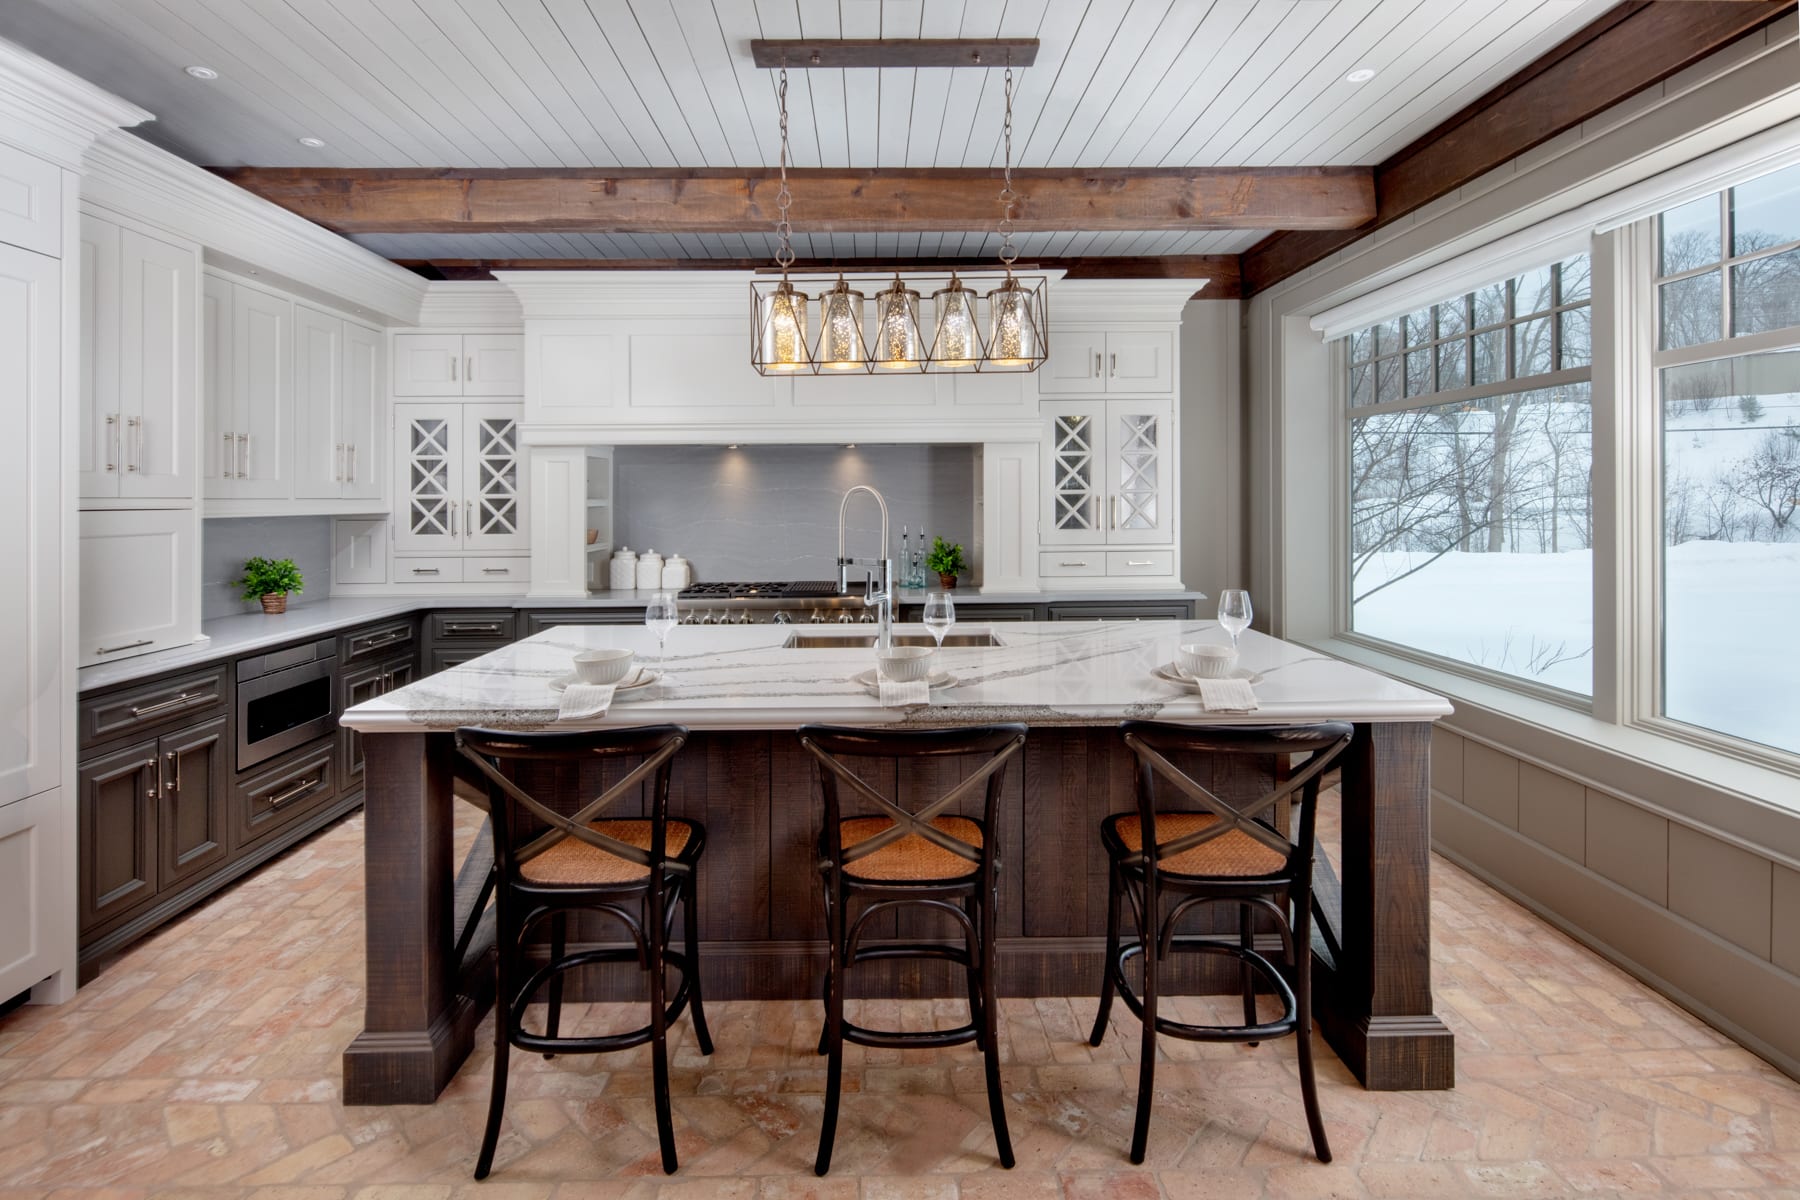 A traditional custom kitchen with a three-tone cabinetry design including white, grey, and band sawn wood.